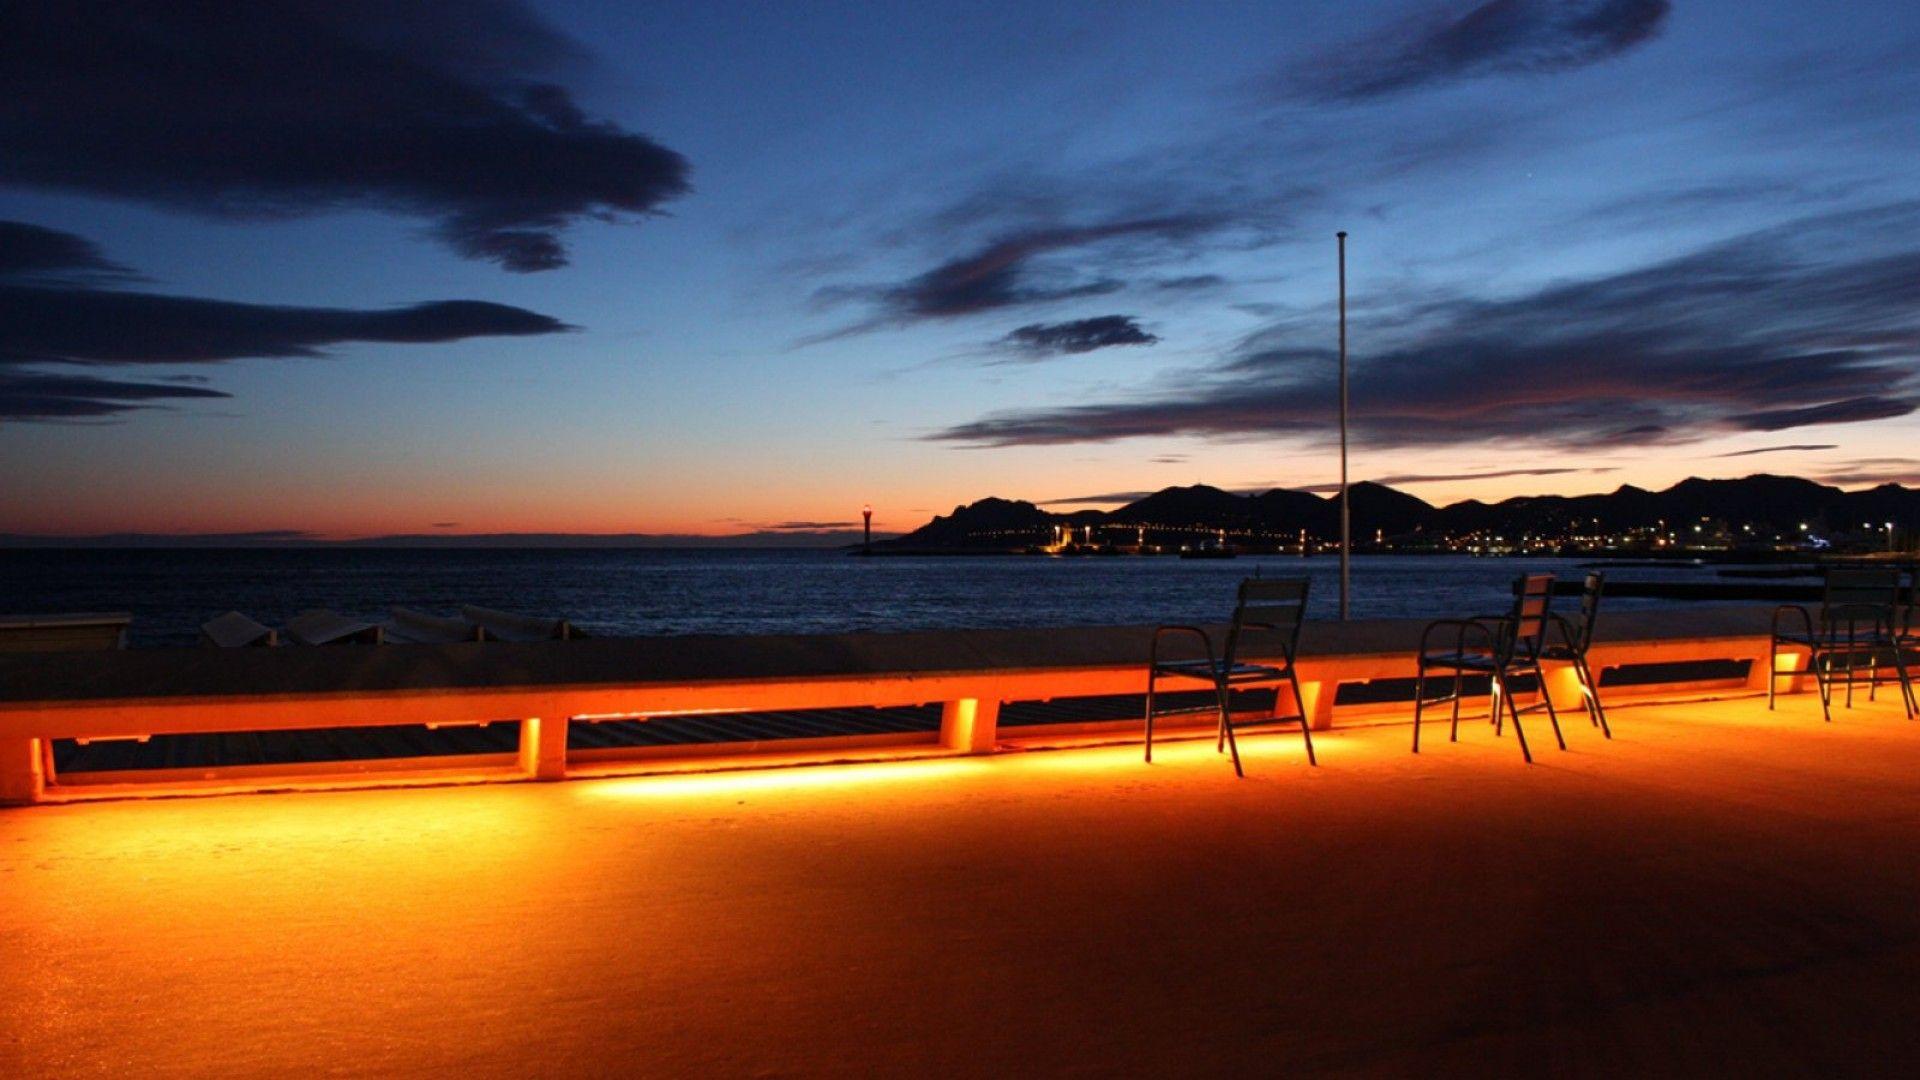 Night in Cannes, France wallpaper and image, picture